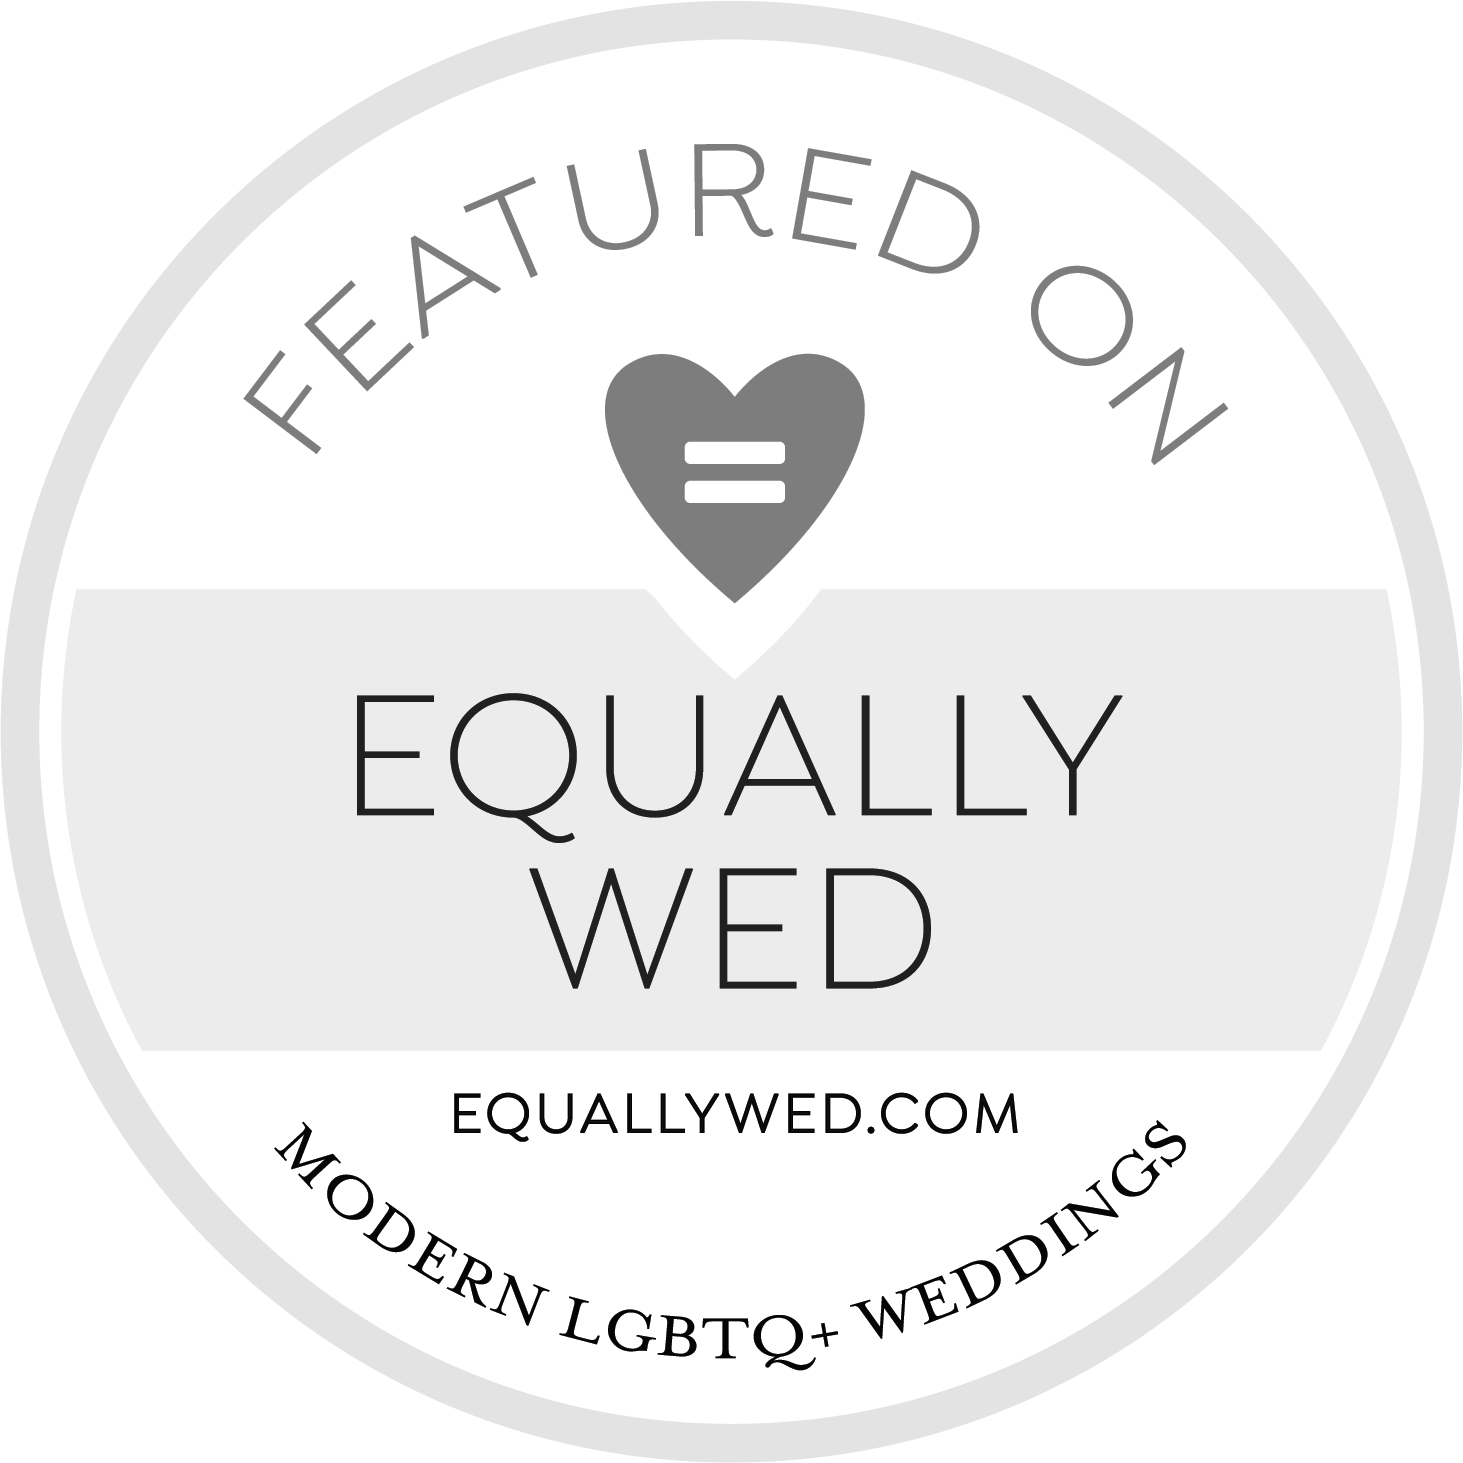 Featured on Equally Wed for LGBTQ+ inclusive weddings